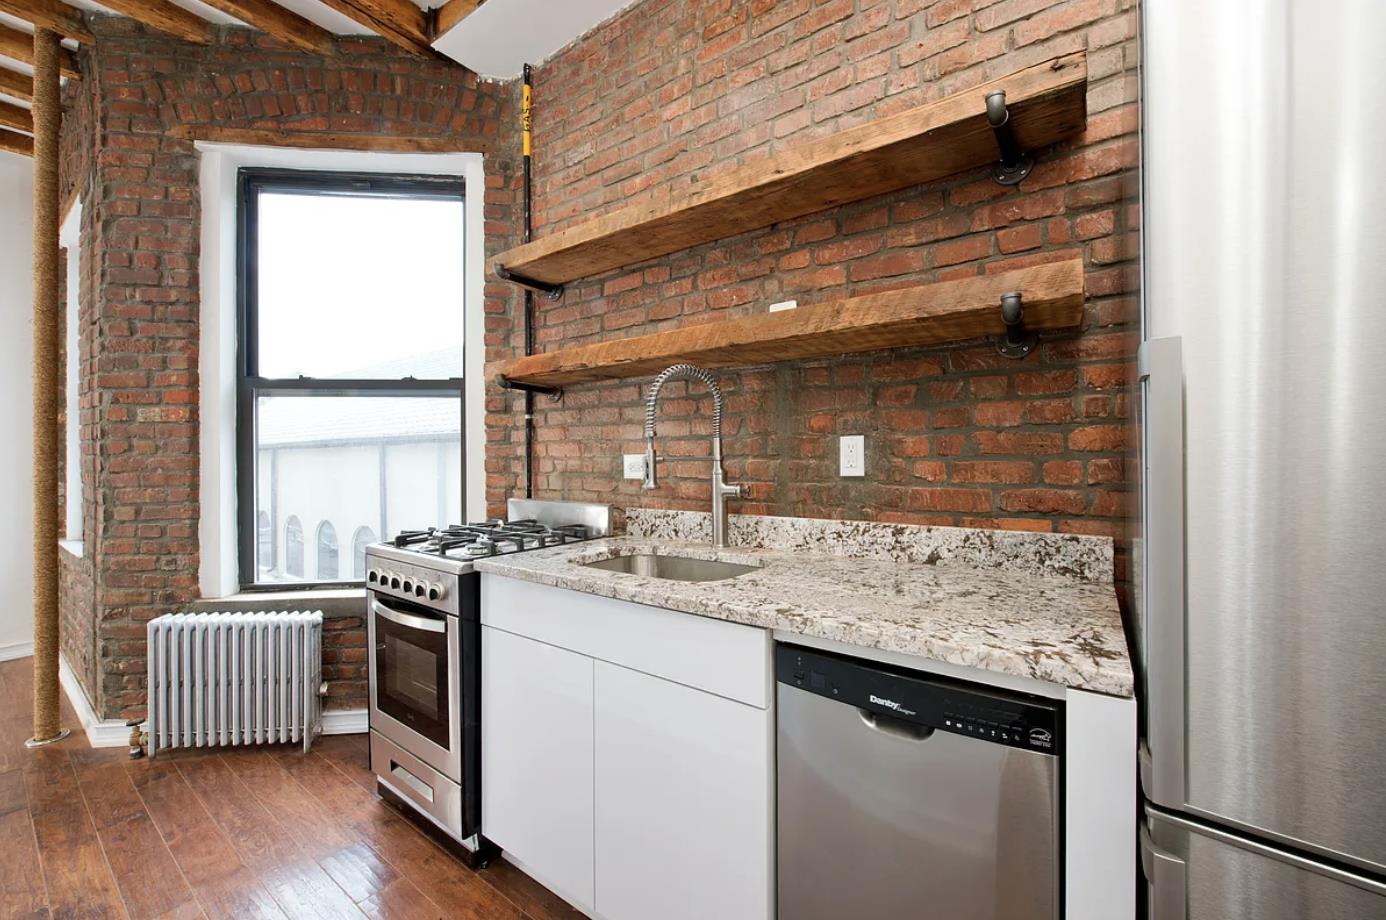 28 Forsyth Street 9, Chinatown, Downtown, NYC - 2 Bedrooms  
1.5 Bathrooms  
5 Rooms - 